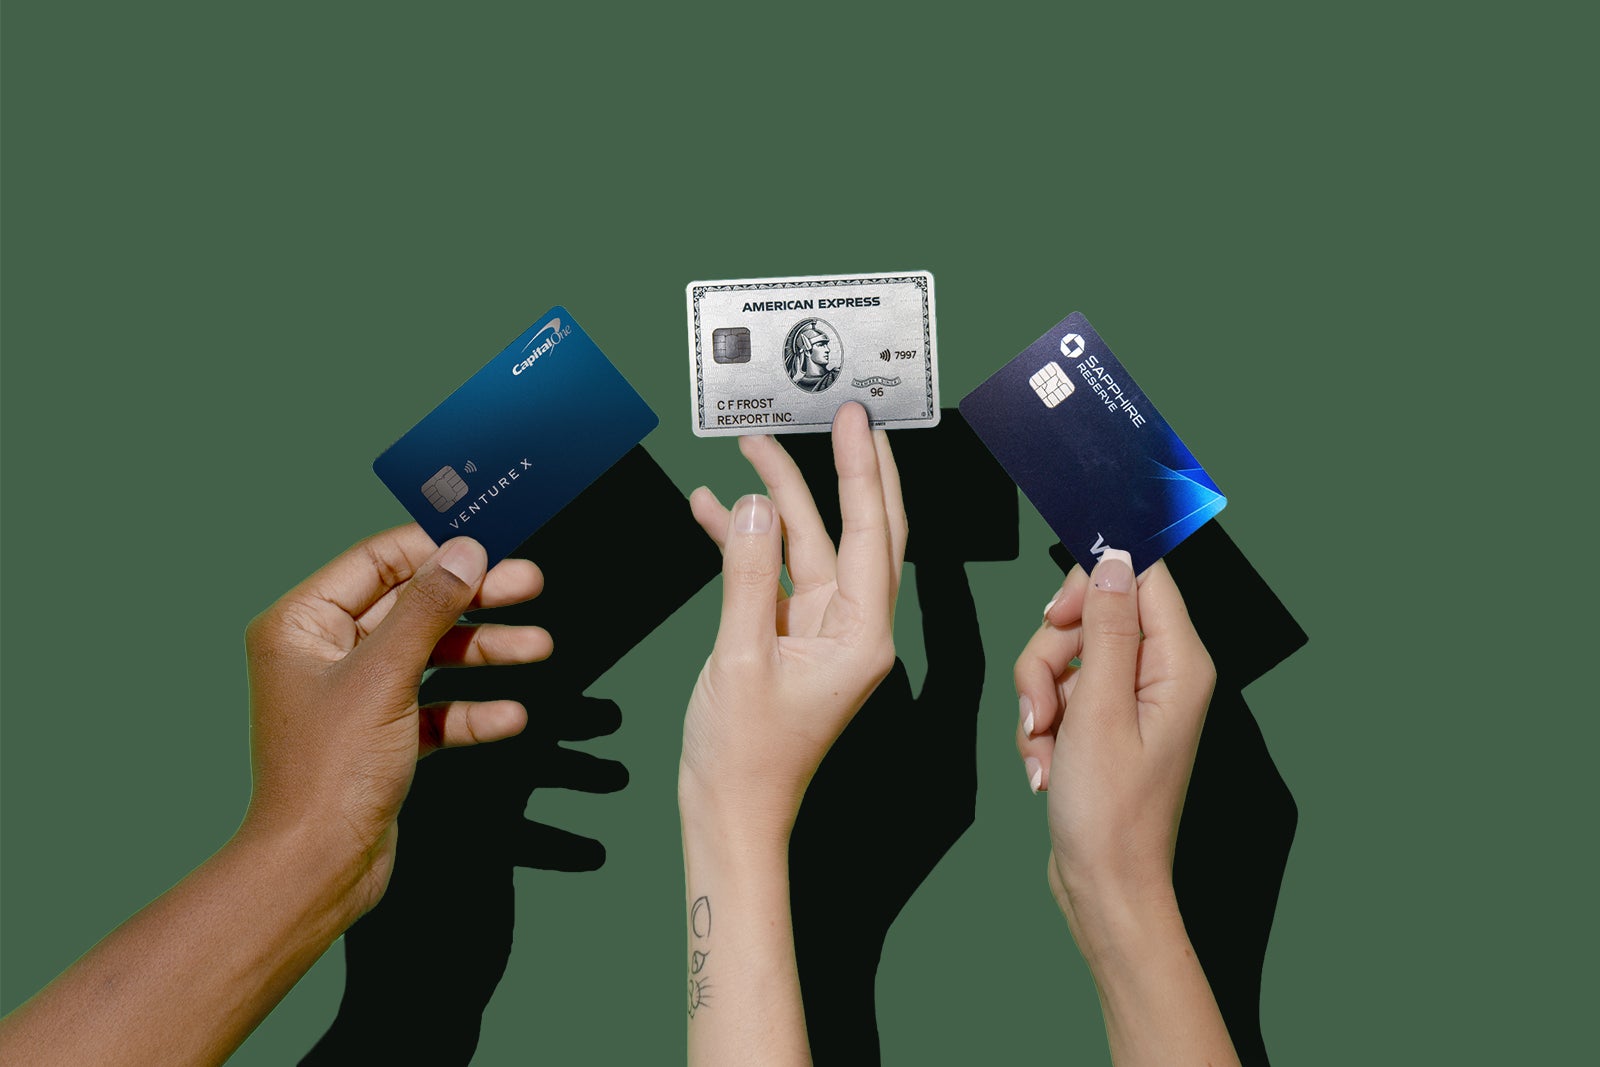 The best premium credit cards: A side-by-side comparison